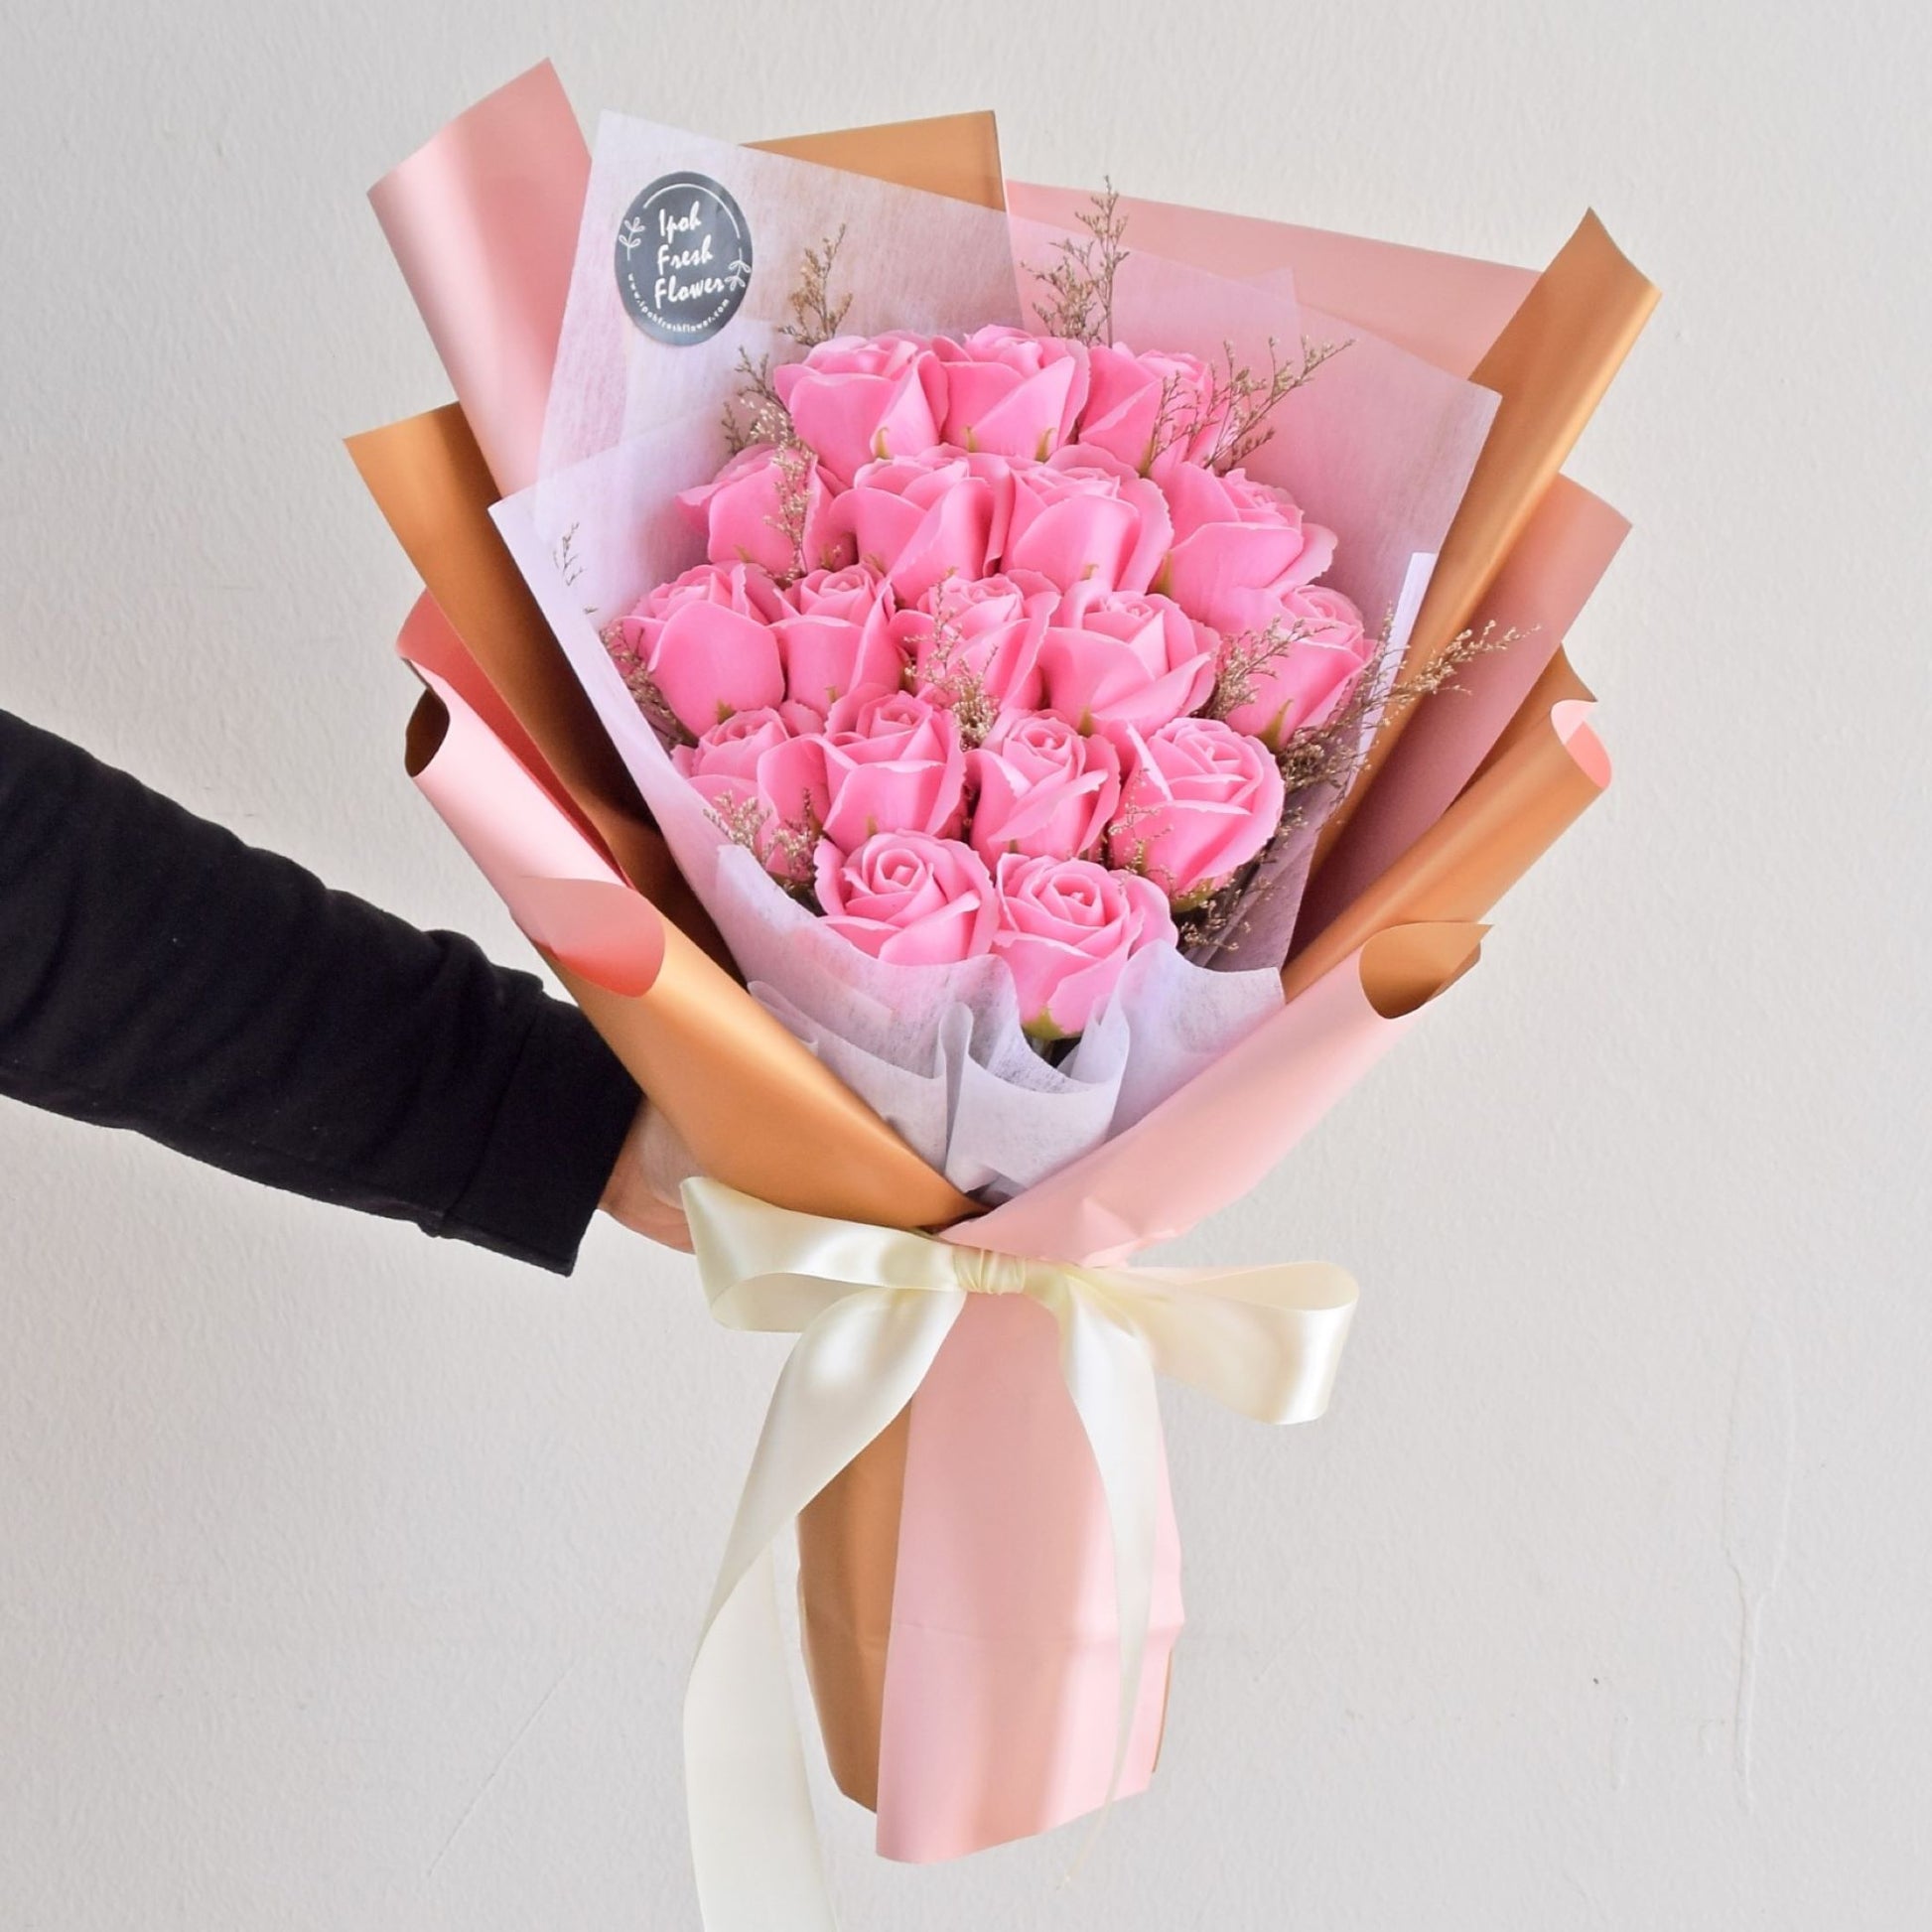 Vinnie| Pink Roses Soap Flower Bouquet |Same Day DeliveryVinnie| Pink Roses Soap Flower Bouquet |Same Day Delivery